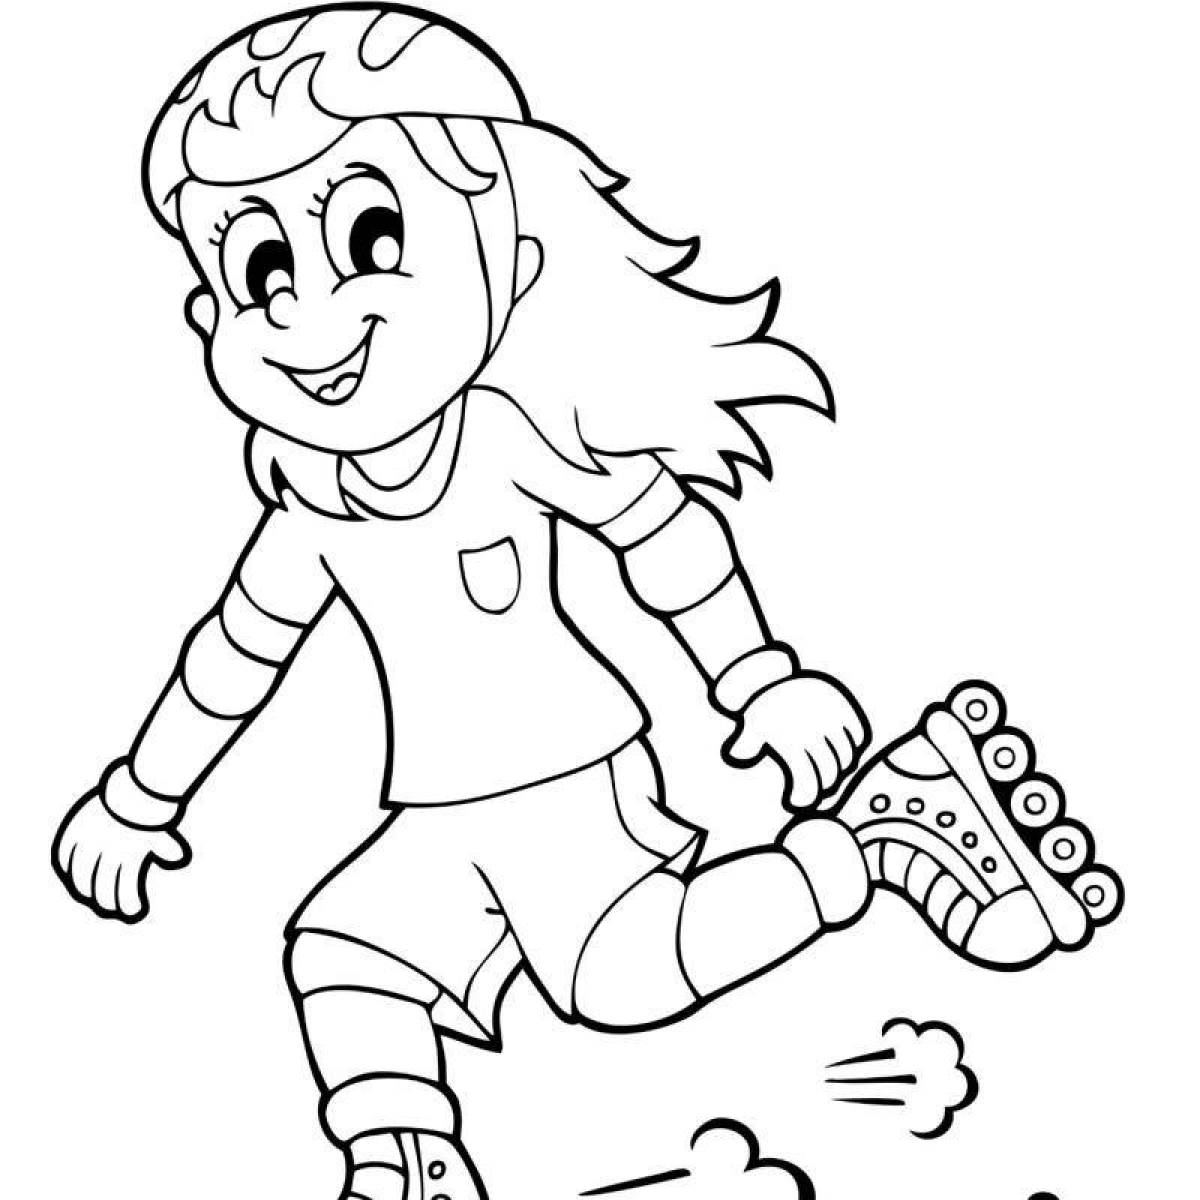 Glowing Lifestyle Coloring Page